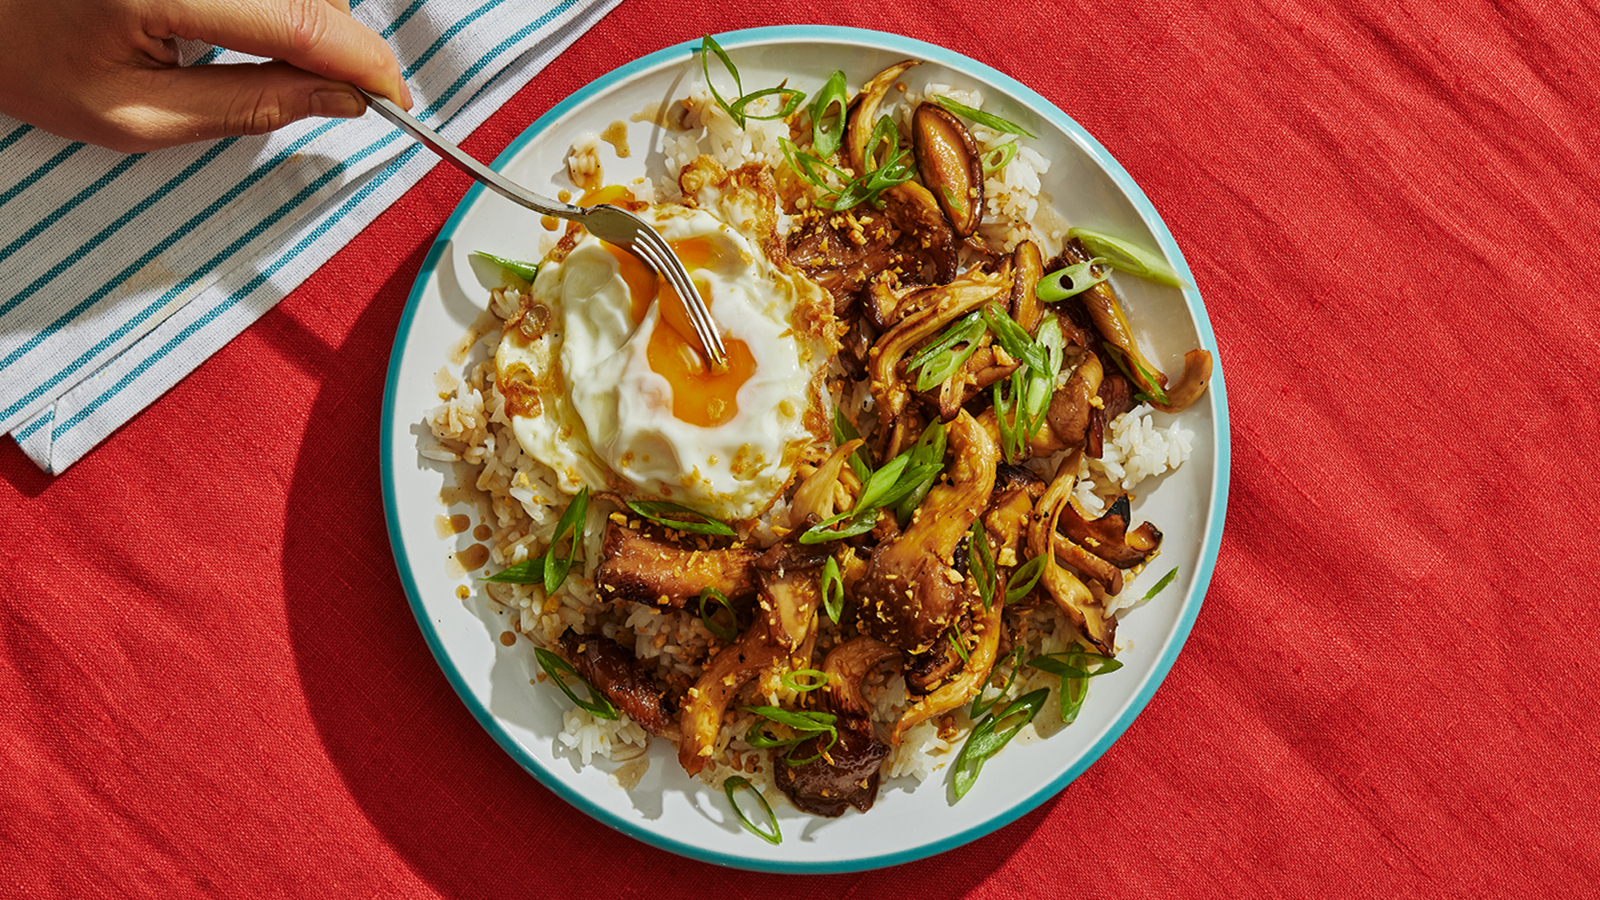 A hand holding a fork breaks a fried egg yolk that sits atop a bowl of mushroom adobo and rice, garnished with scallions.